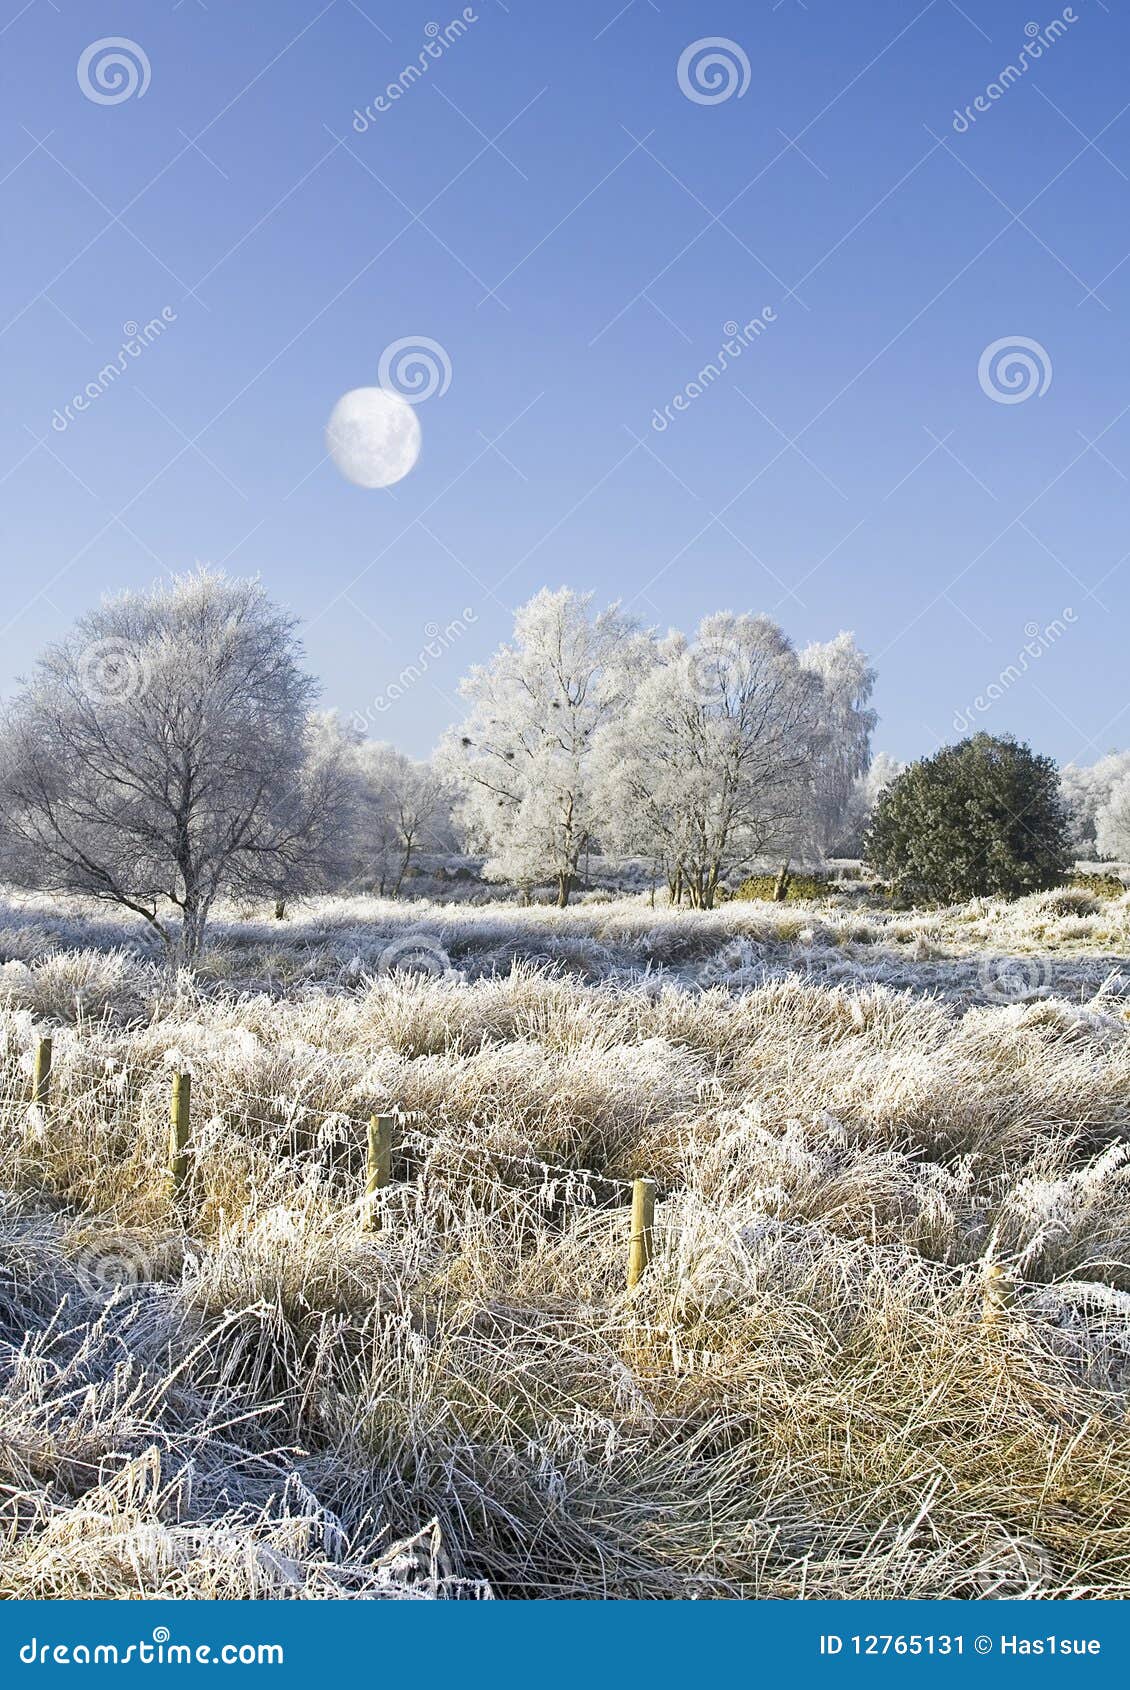 moon and wintry countryside